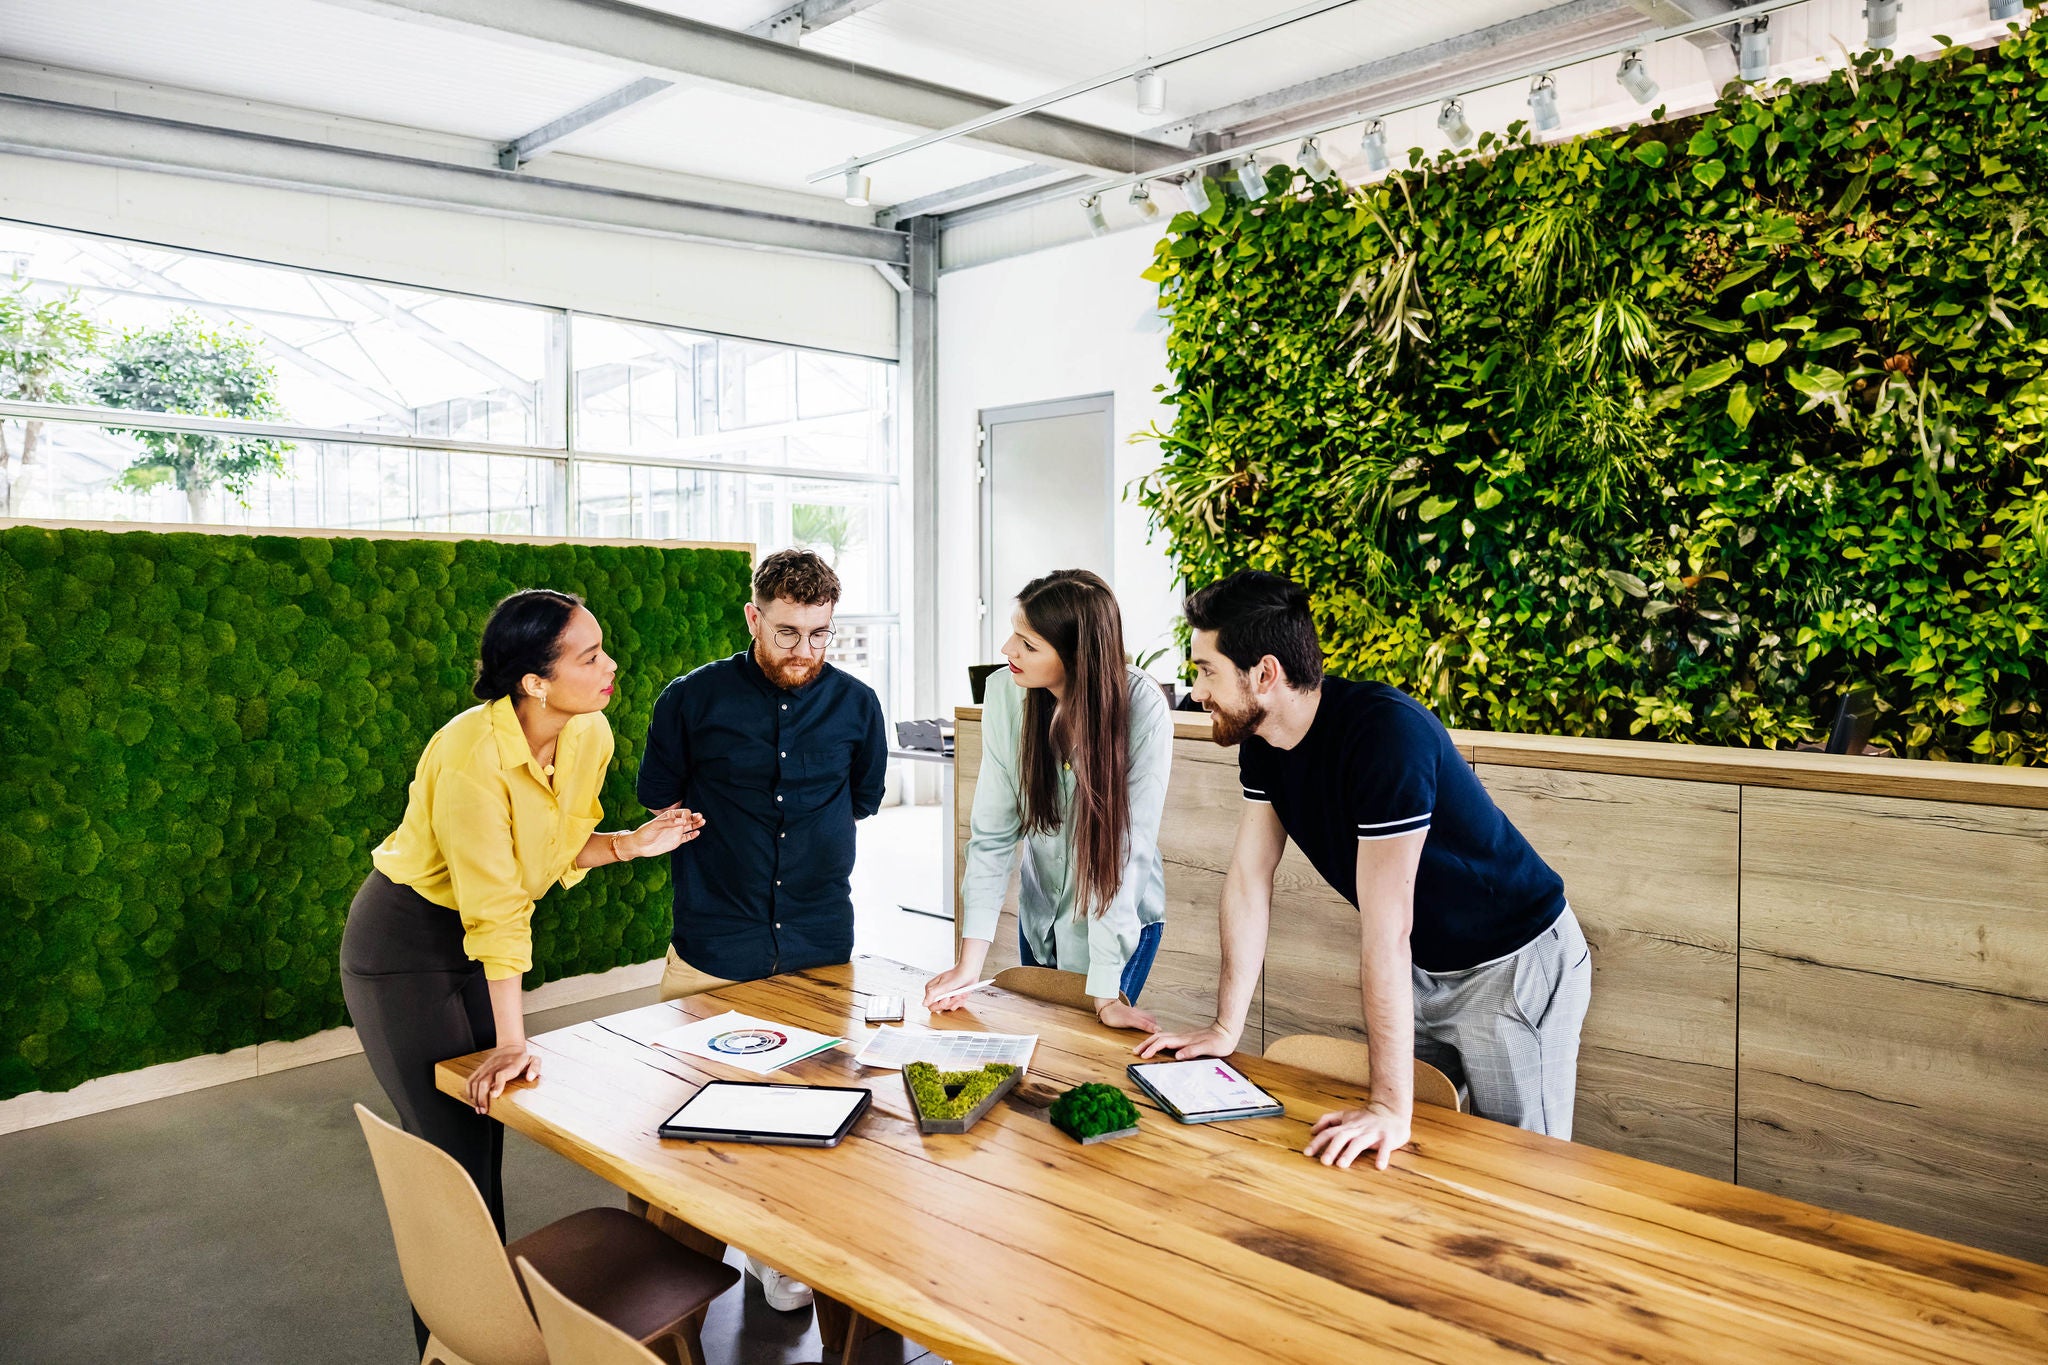 A group of  business associated huddled around a table having a serious meeting and sharing ideas in a green and modern office space.